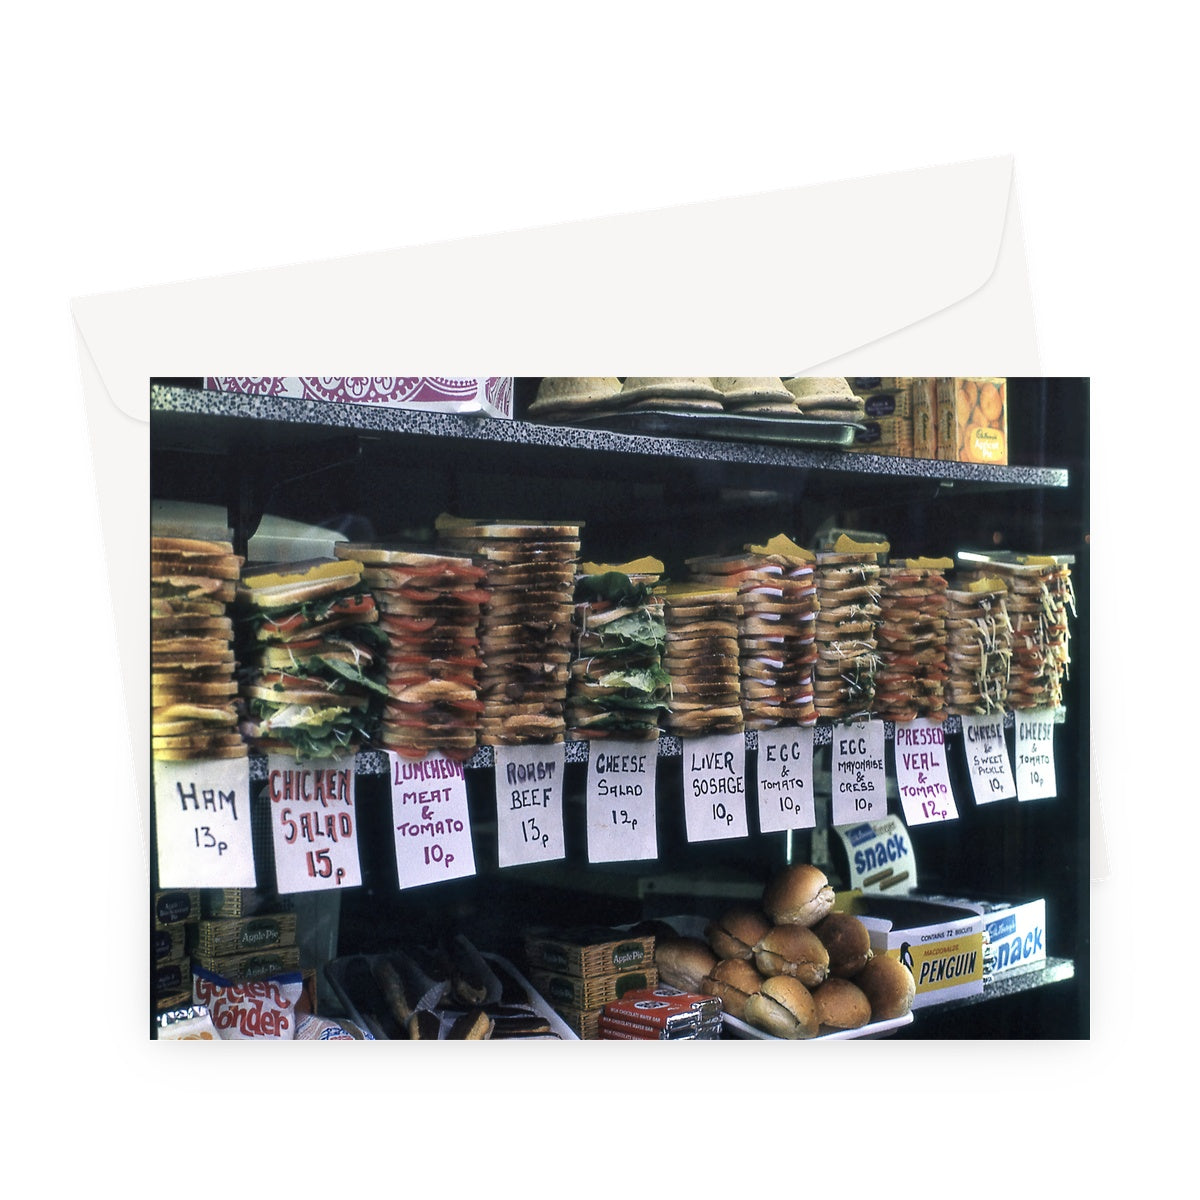 Sandwiches for Sale in London, 1972 - Greeting Card